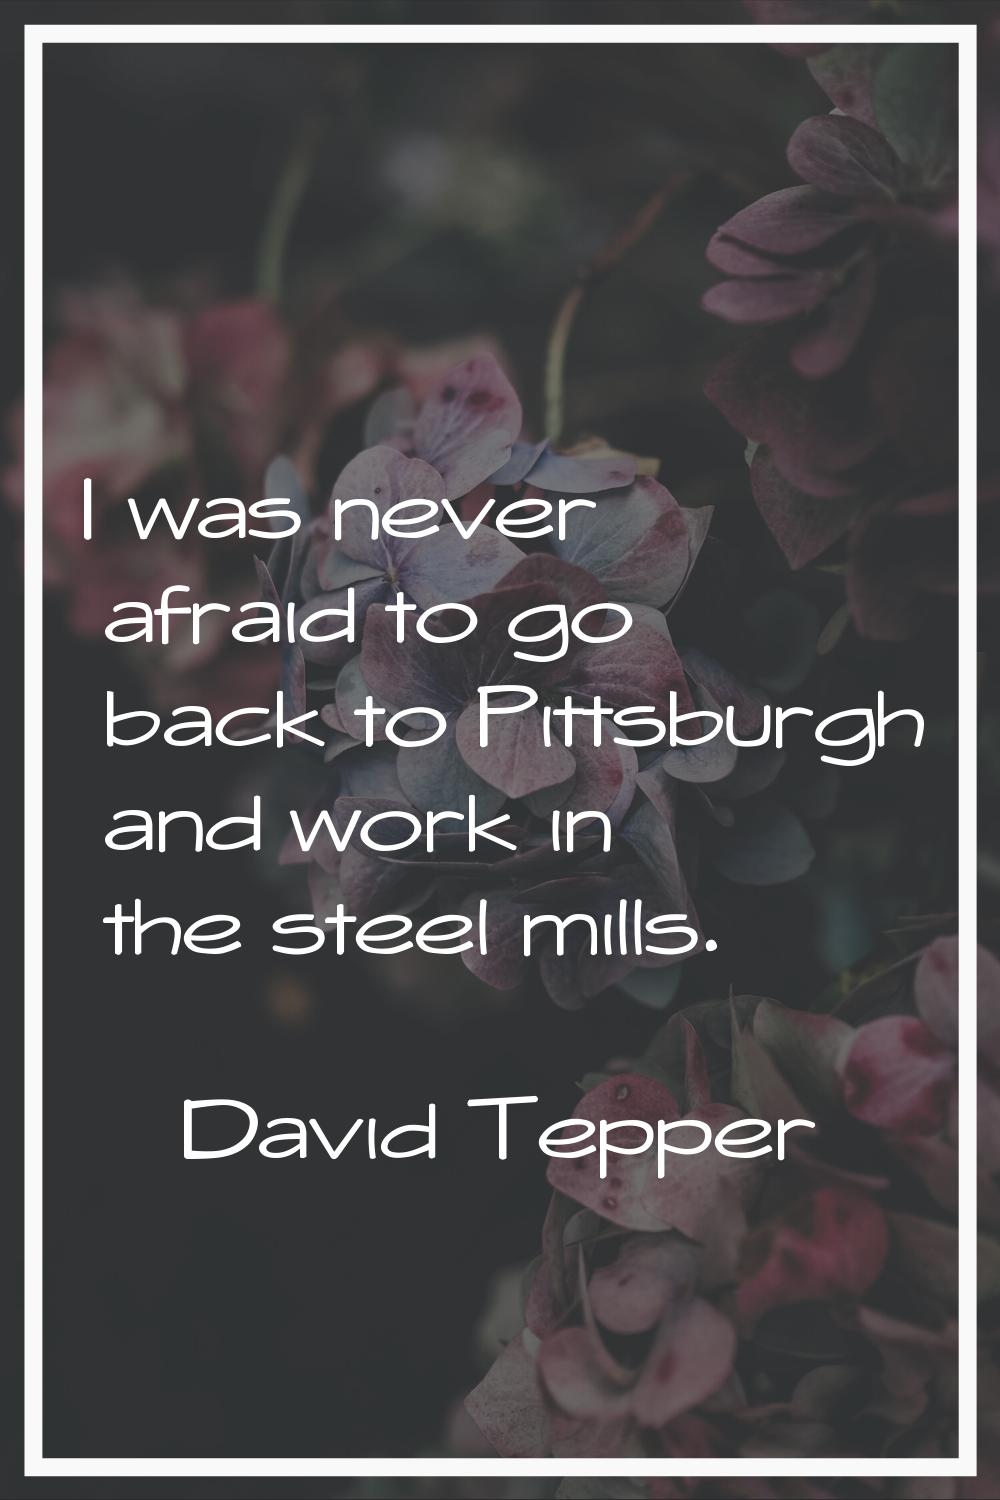 I was never afraid to go back to Pittsburgh and work in the steel mills.